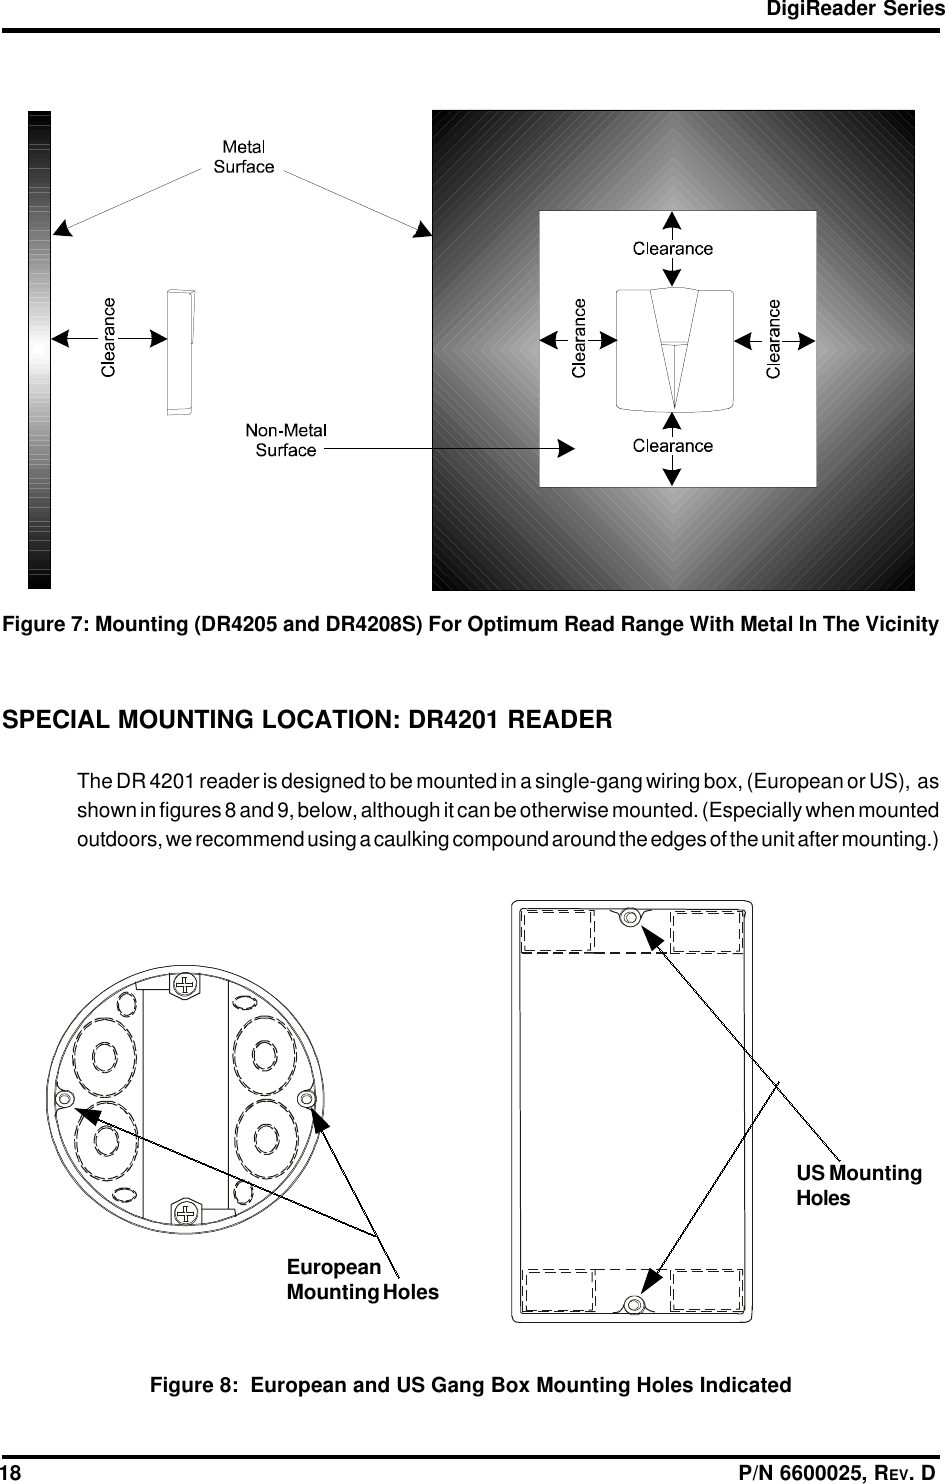 DigiReader Series18                                                                                                                  P/N 6600025, REV. DFigure 7: Mounting (DR4205 and DR4208S) For Optimum Read Range With Metal In The VicinitySPECIAL MOUNTING LOCATION: DR4201 READERThe DR 4201 reader is designed to be mounted in a single-gang wiring box, (European or US),  asshown in figures 8 and 9, below, although it can be otherwise mounted. (Especially when mountedoutdoors, we recommend using a caulking compound around the edges of the unit after mounting.)Figure 8:  European and US Gang Box Mounting Holes IndicatedEuropeanMounting HolesUS MountingHoles